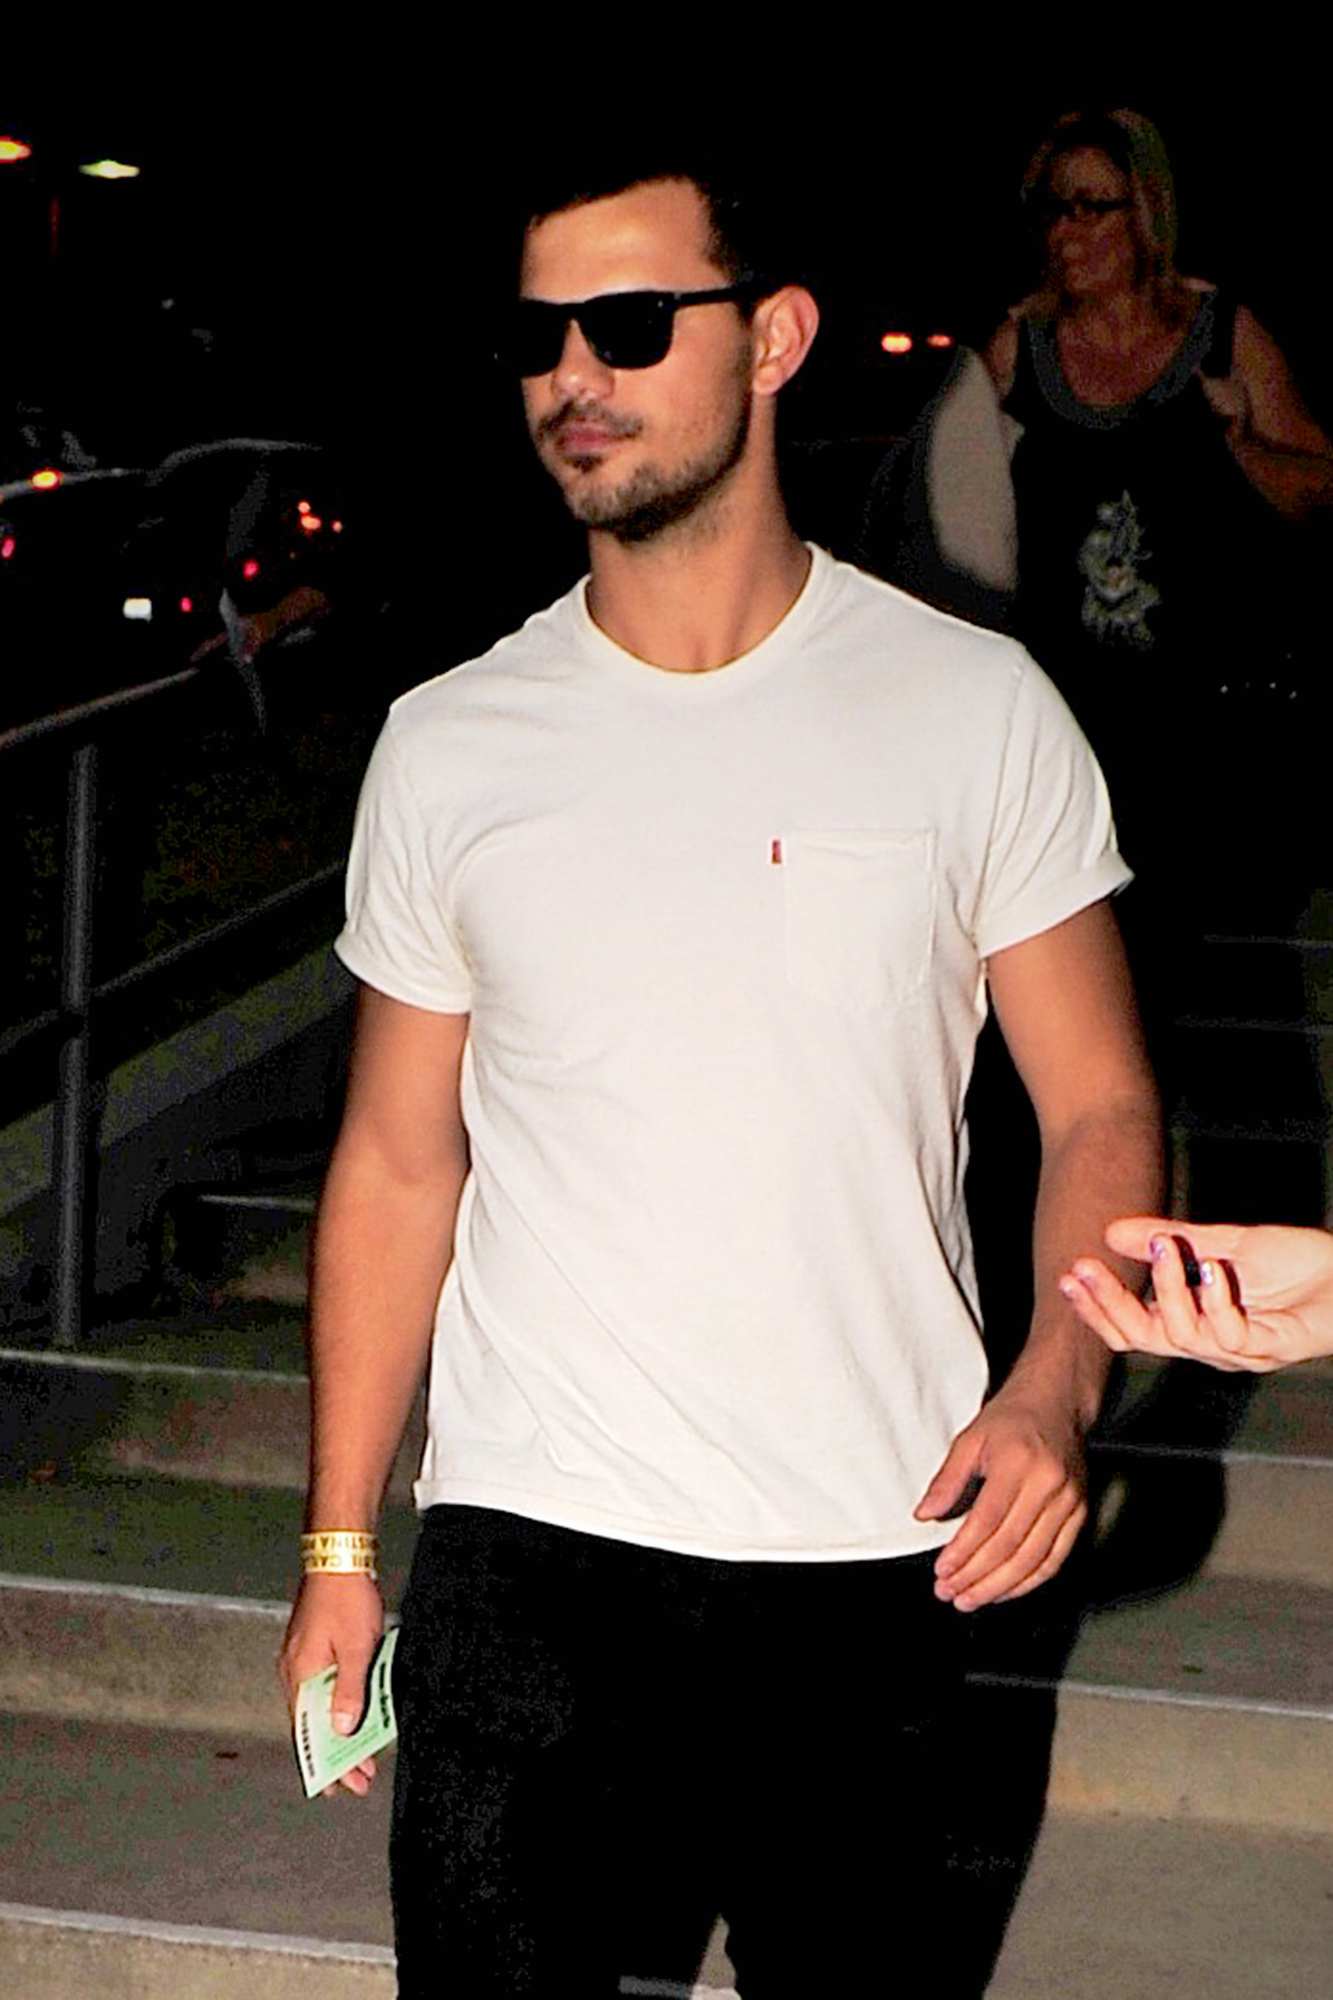 Taylor Lautner and Alessandra Torresani Date Night at Colbie Caillat Concert